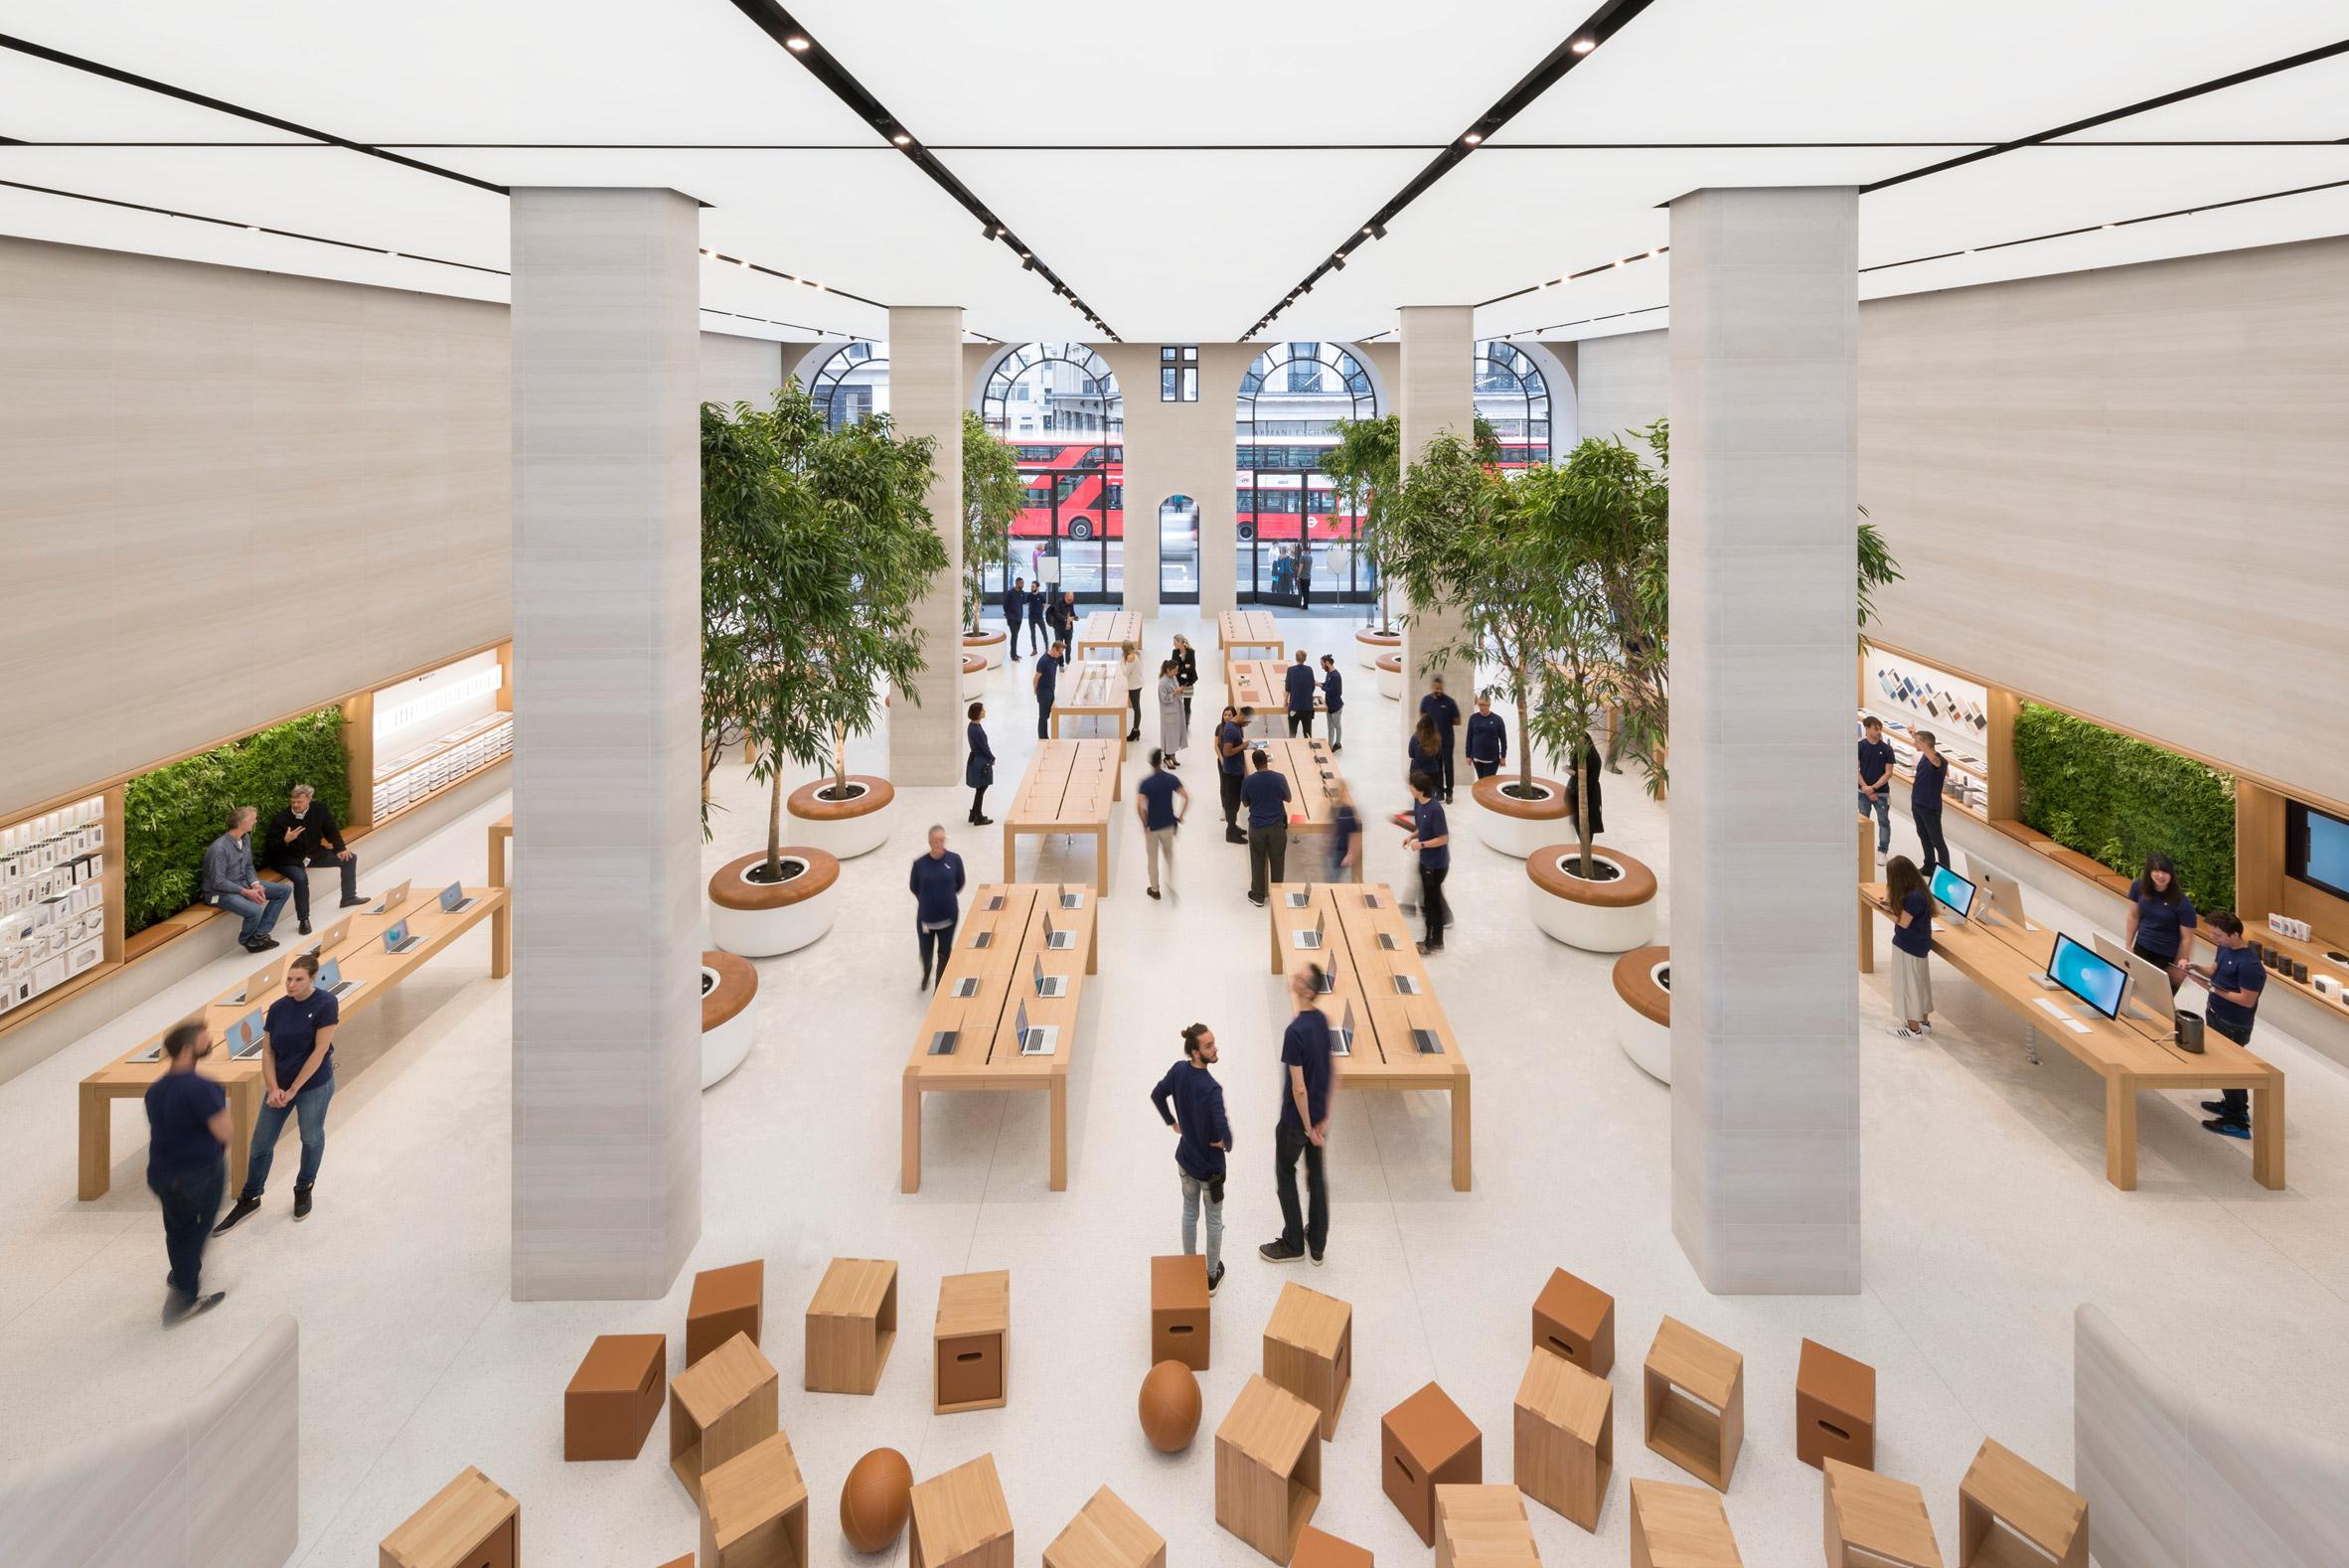 Apple's new store in London has reopened following a major renovation by Foster + Partners that incorporates the tech giant's new approach to retail. The Regent Street store – Apple's first outpost in Europe when it opened in 2004 – was closed for a lengthy period while it was revamped according to the company's new interior design format.